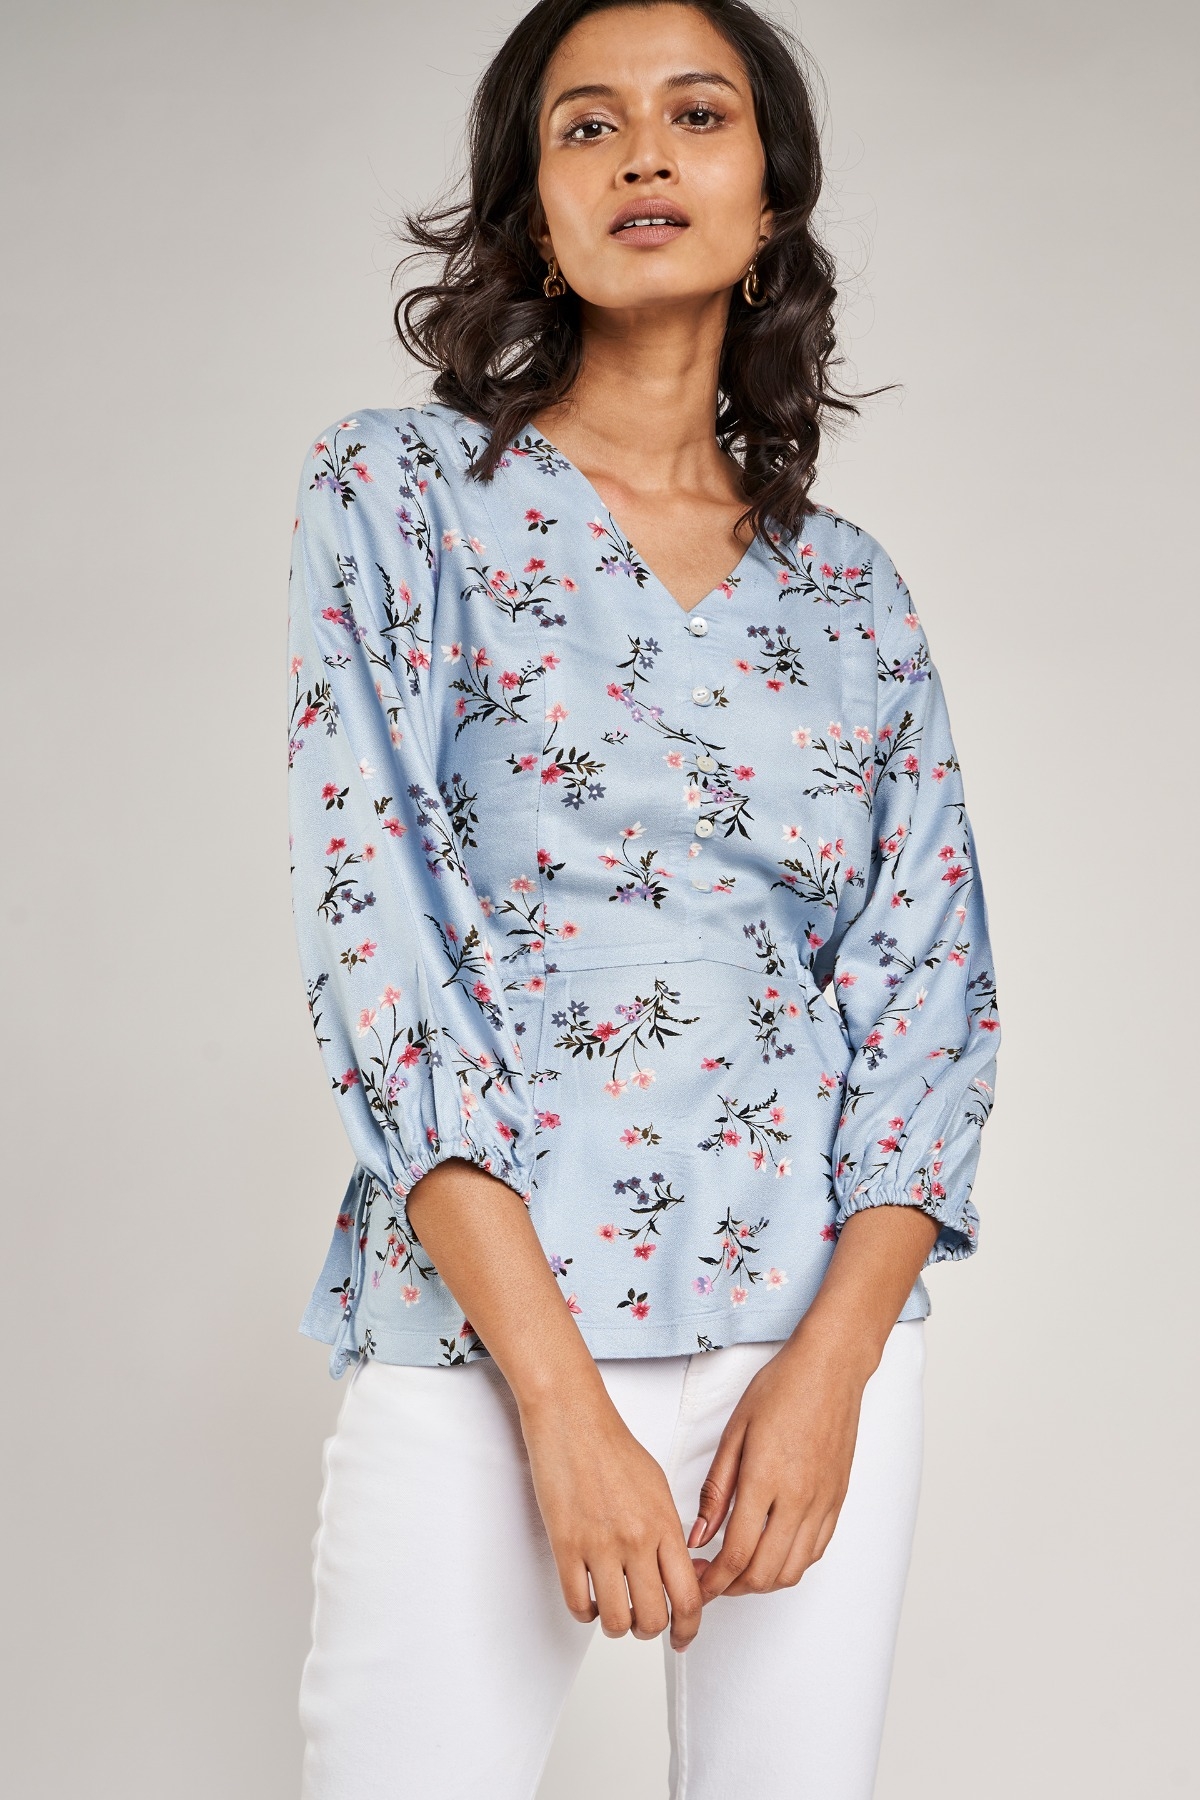 AND | Powder Blue Floral Printed Peplum Top